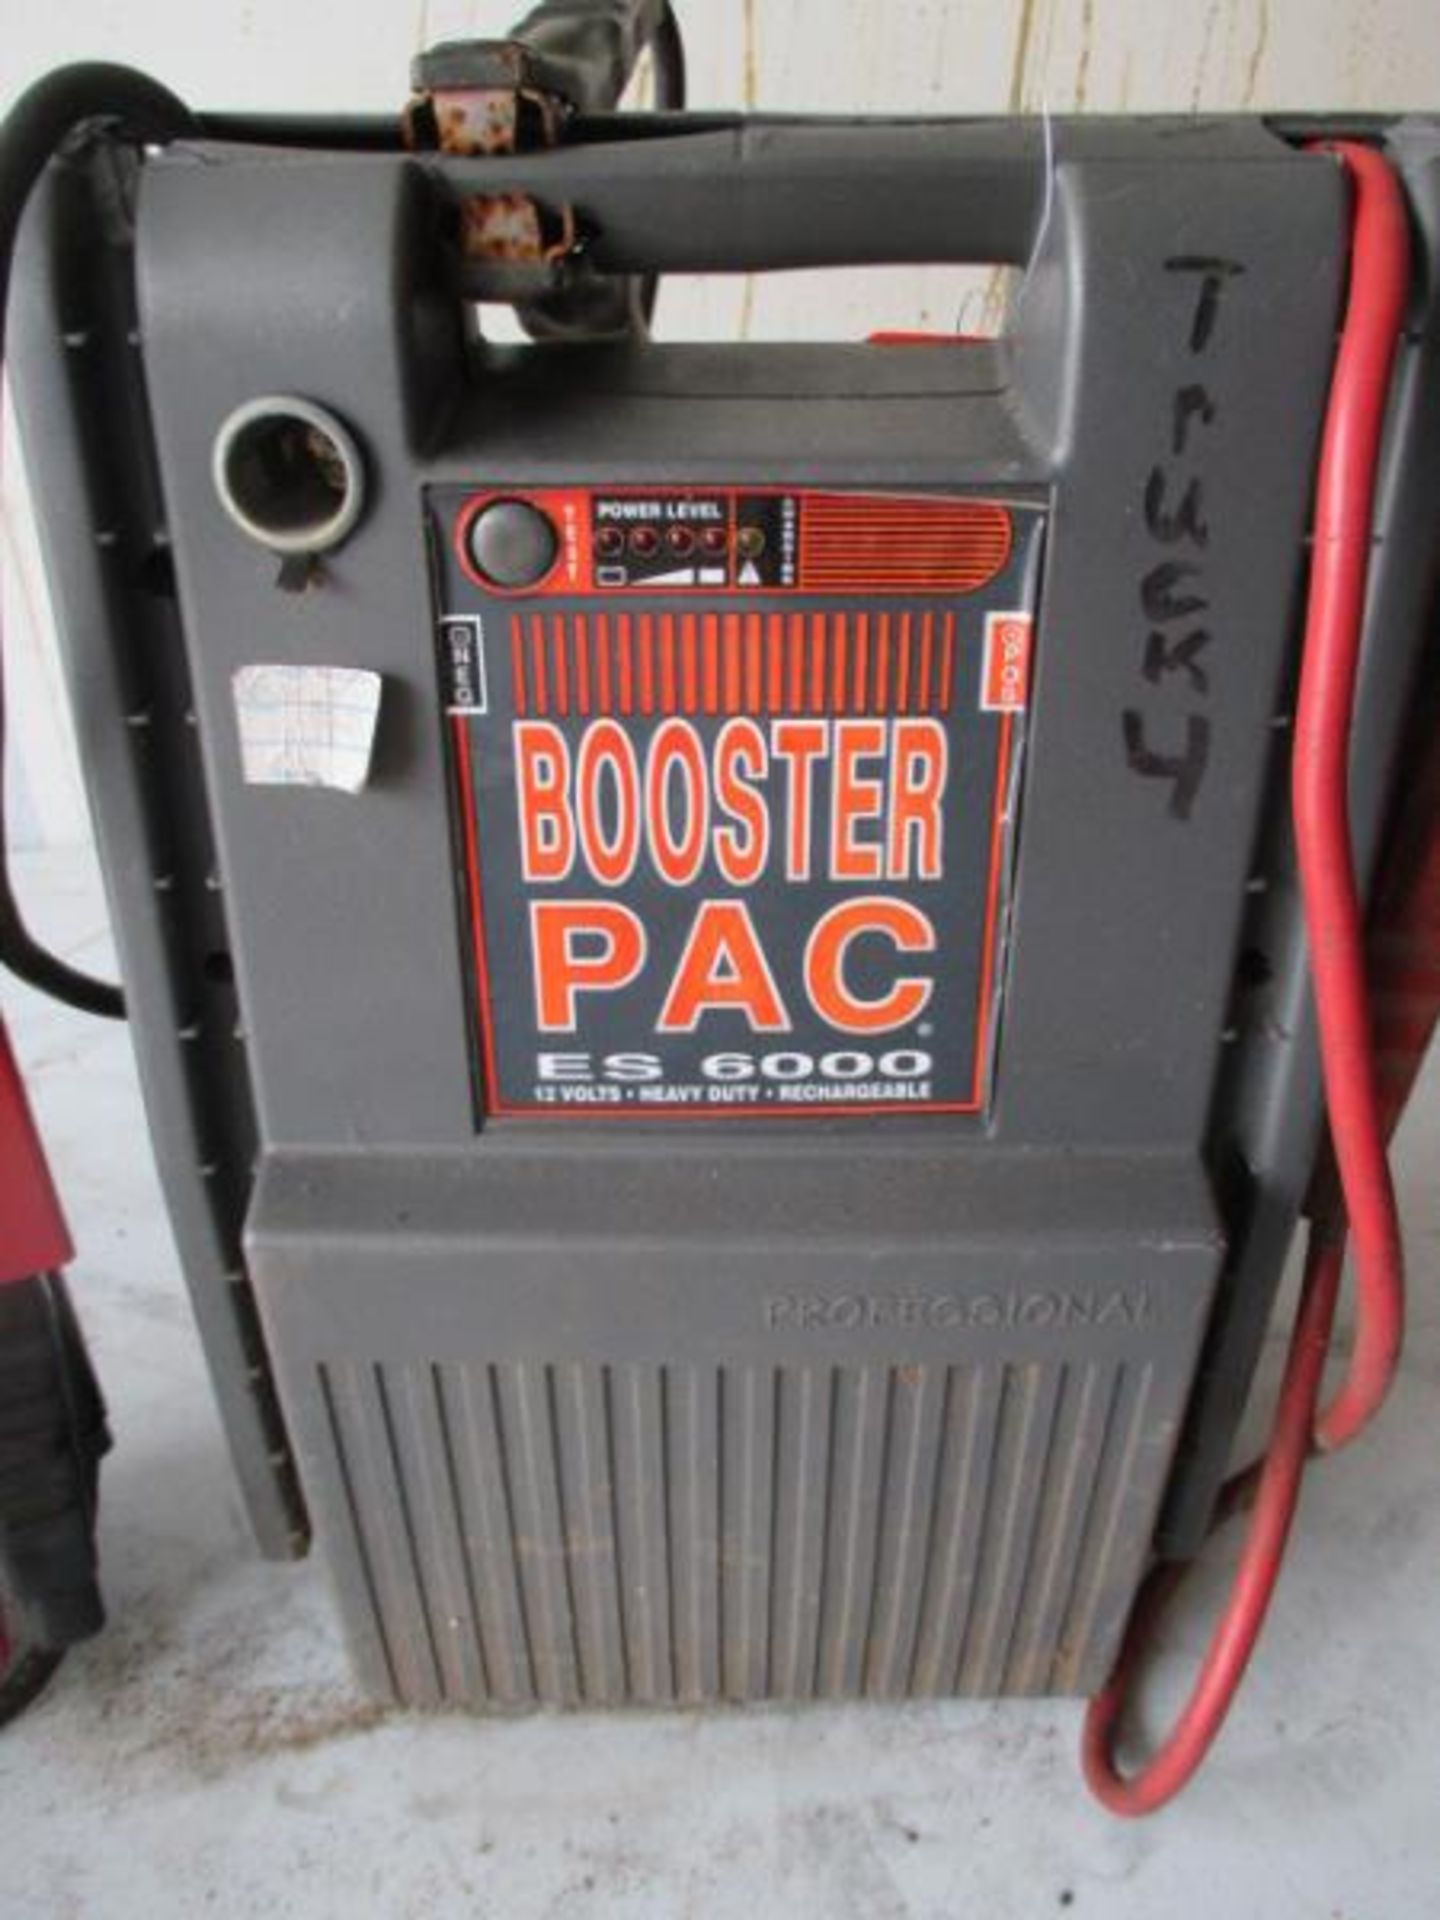 (2) Jump Packs - (1) Solar Commercial Booster Pac, ES6000, 12V, Heavy Duty, Rechargable - Back